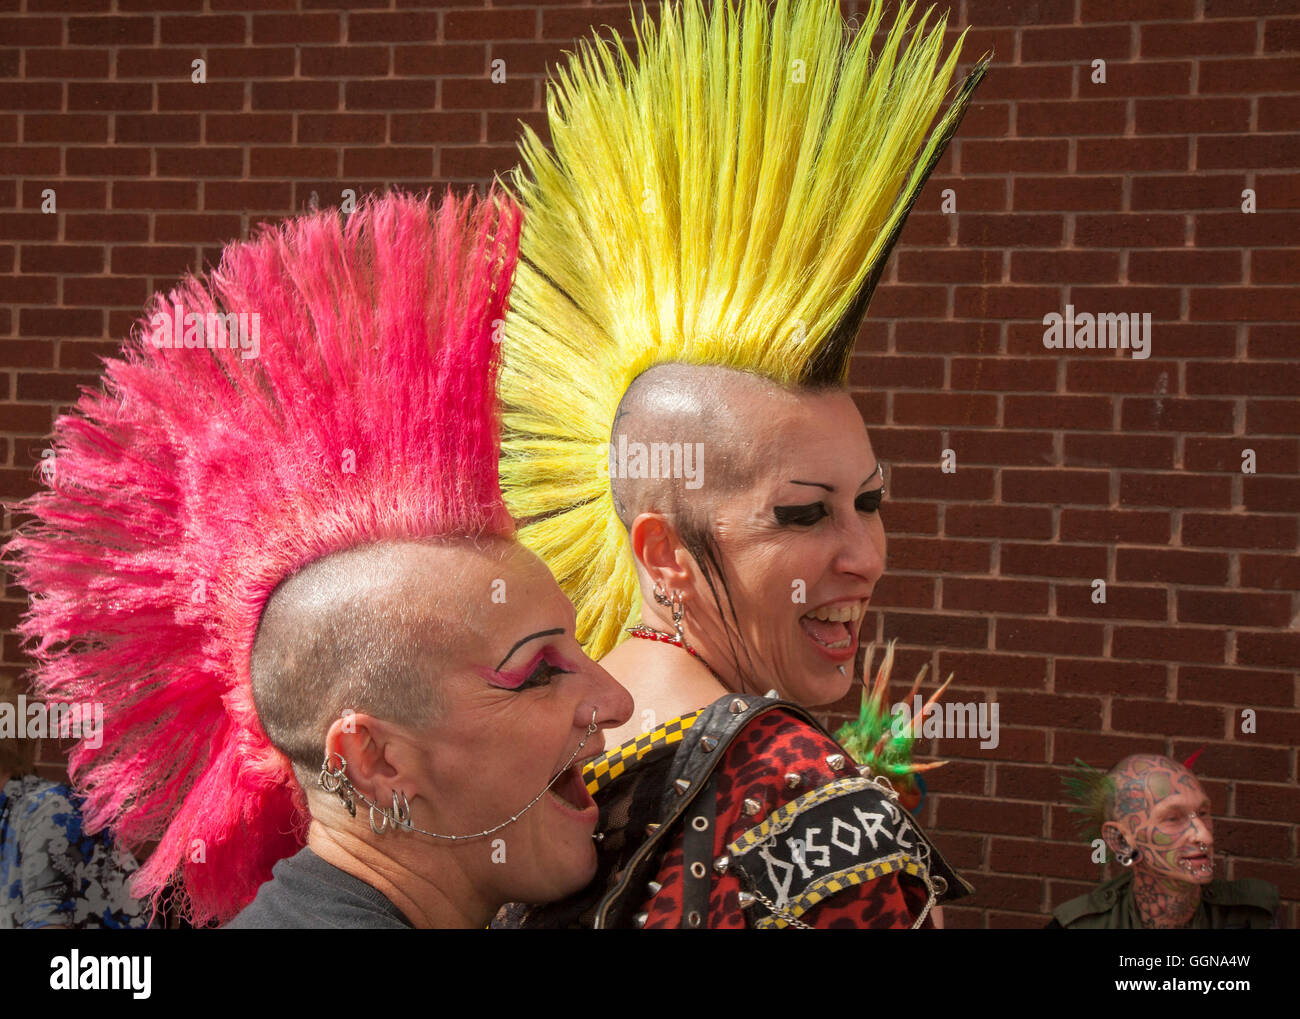 A couple with mohawk or Mohican hairstyle with head shaven.  20th anniversary Rebellion fest returned to Blackpool Winter Gardens as one of the world’s biggest punk festivals.  Spiky-haired punks with Mohican hair gathered at the UK’s biggest alternative music festival. The Rebellion Festival sees hard rocking punk bands take to the stage at Blackpool’s Winter Gardens every year to the delight of cheering crowds. The resort’s streets are painted every colour of the rainbow as lifelong punk fans with vividly dyed Mohawks, red yellow spiky mohican leather jackets flock to the Festival Stock Photo